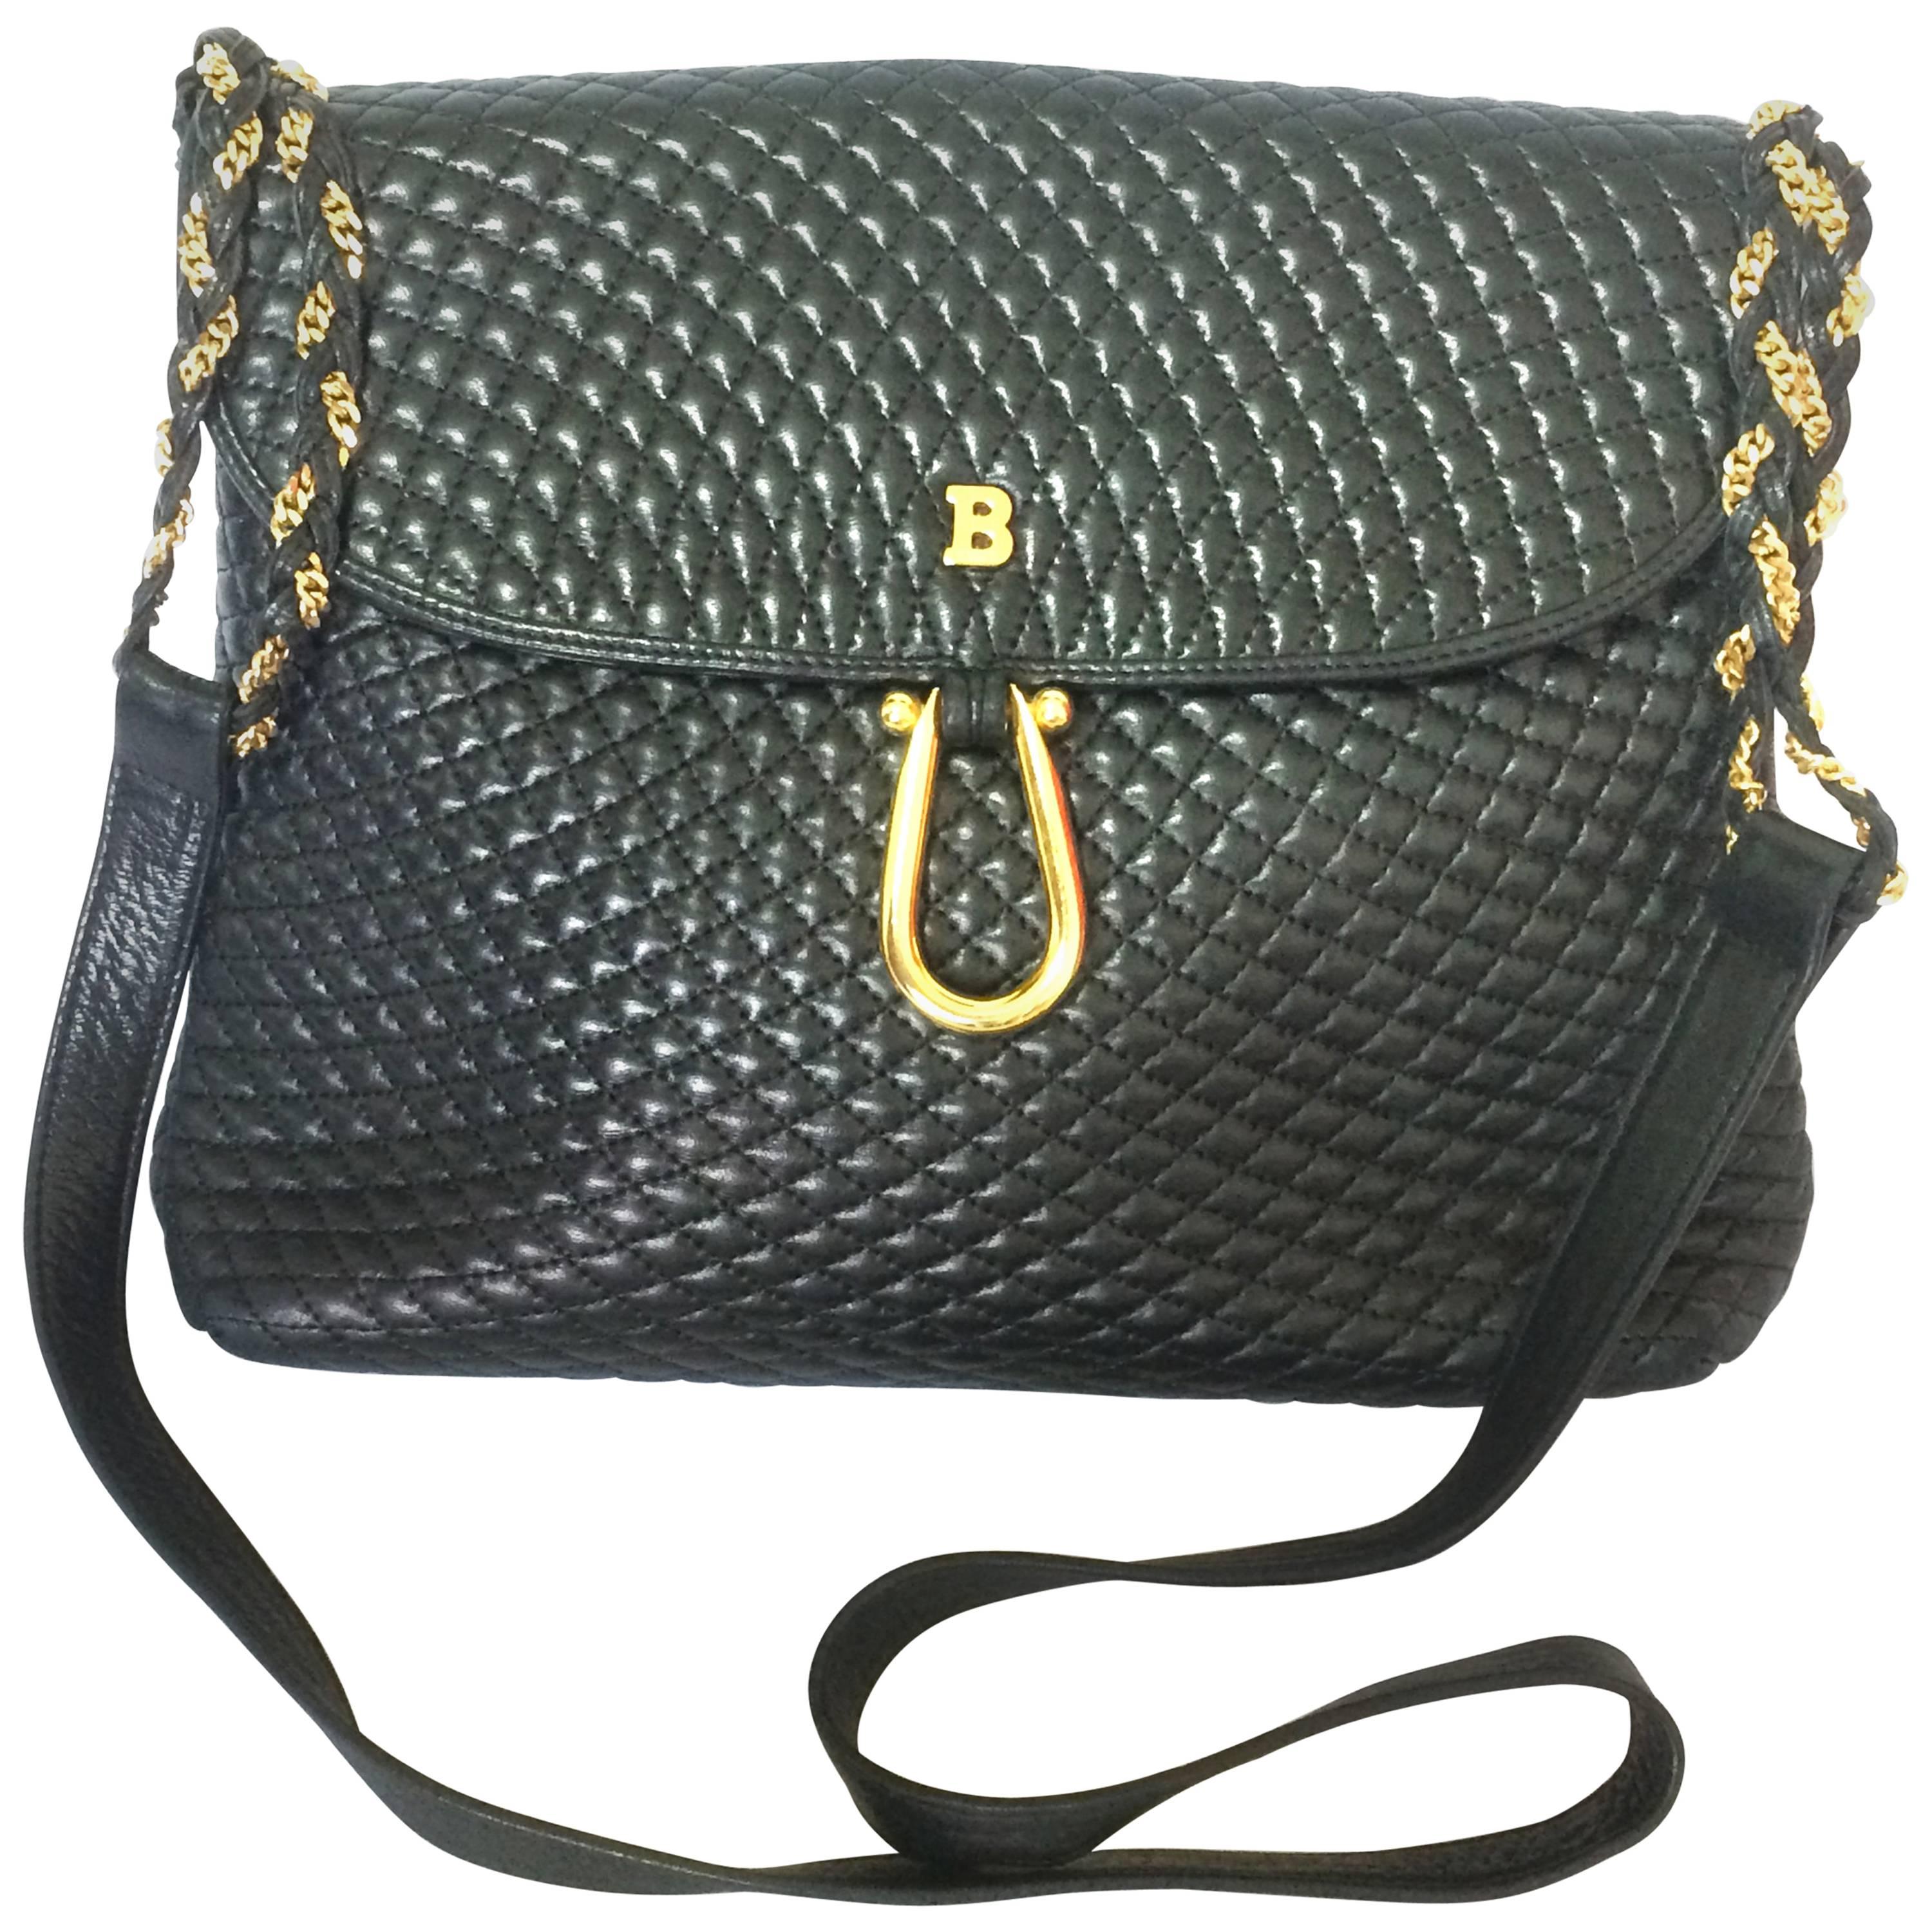 Vintage Bally classic black quilted leather shoulder bag with golden chain strap